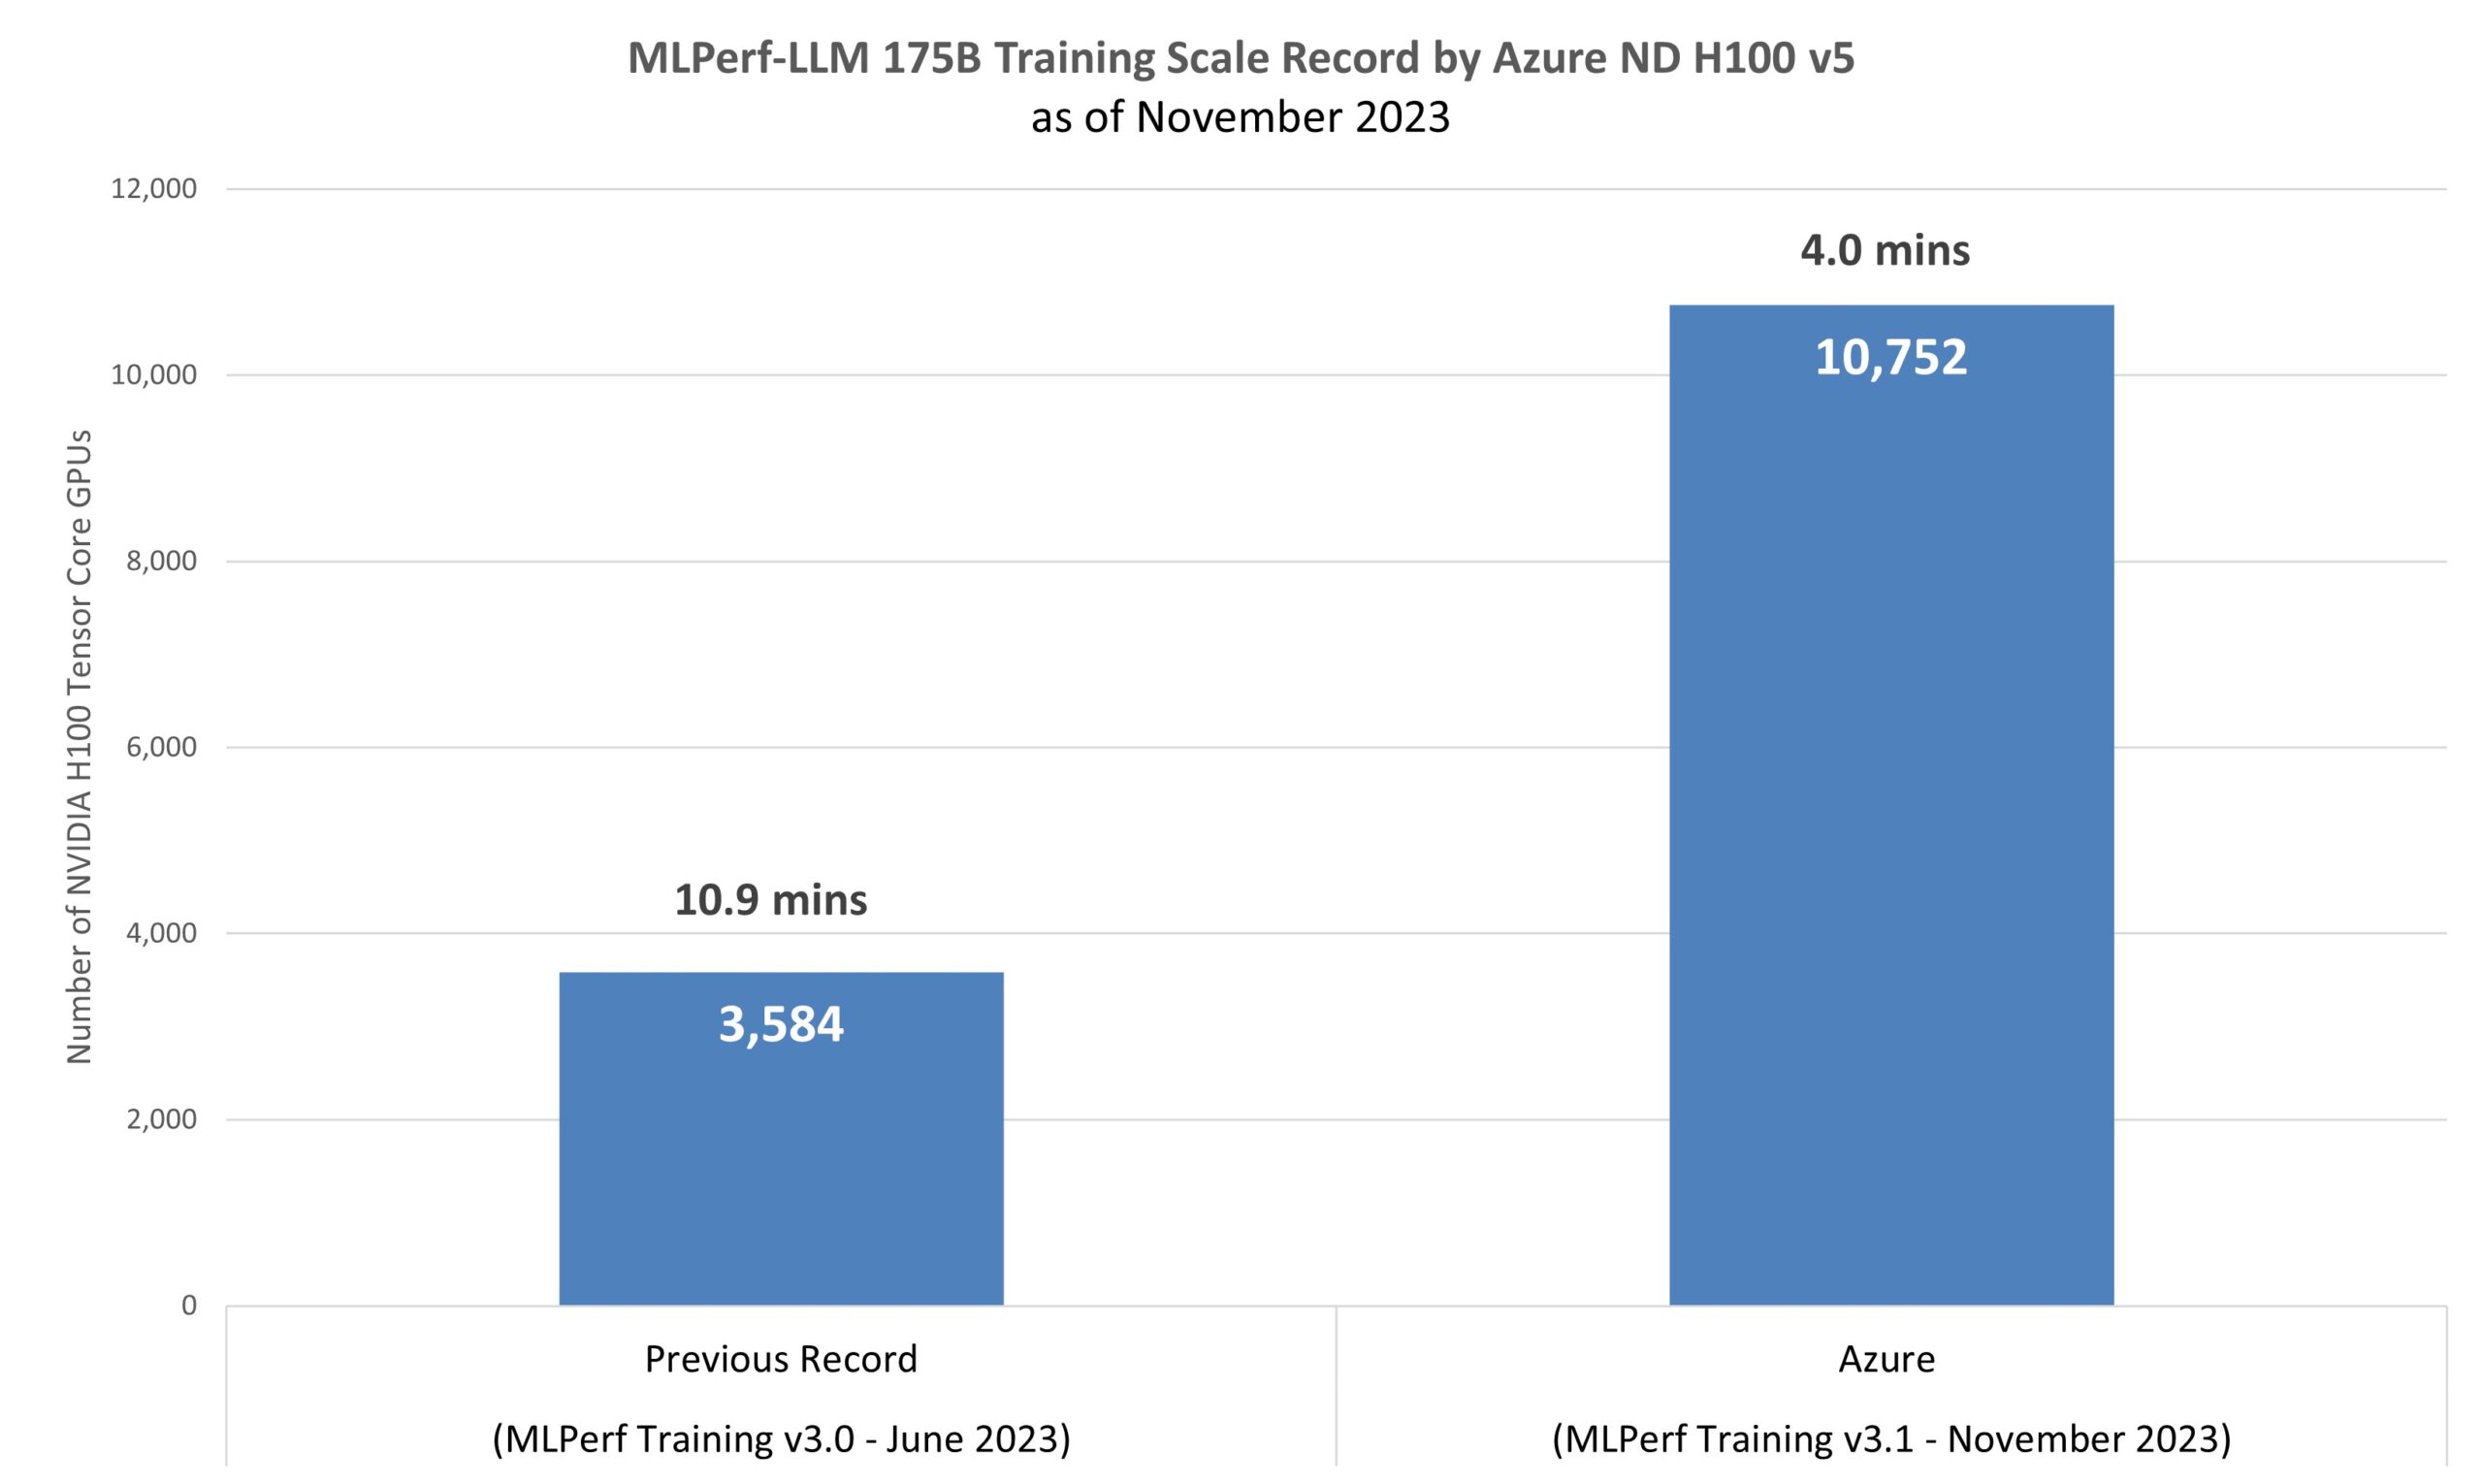 Scale records on the model GPT-3 (175 billion parameters) from MLPerf Training v3.0 in June 2023 (3.0-2003) and Azure on MLPerf Training v3.1 in November 2023 (3.1-2002). 